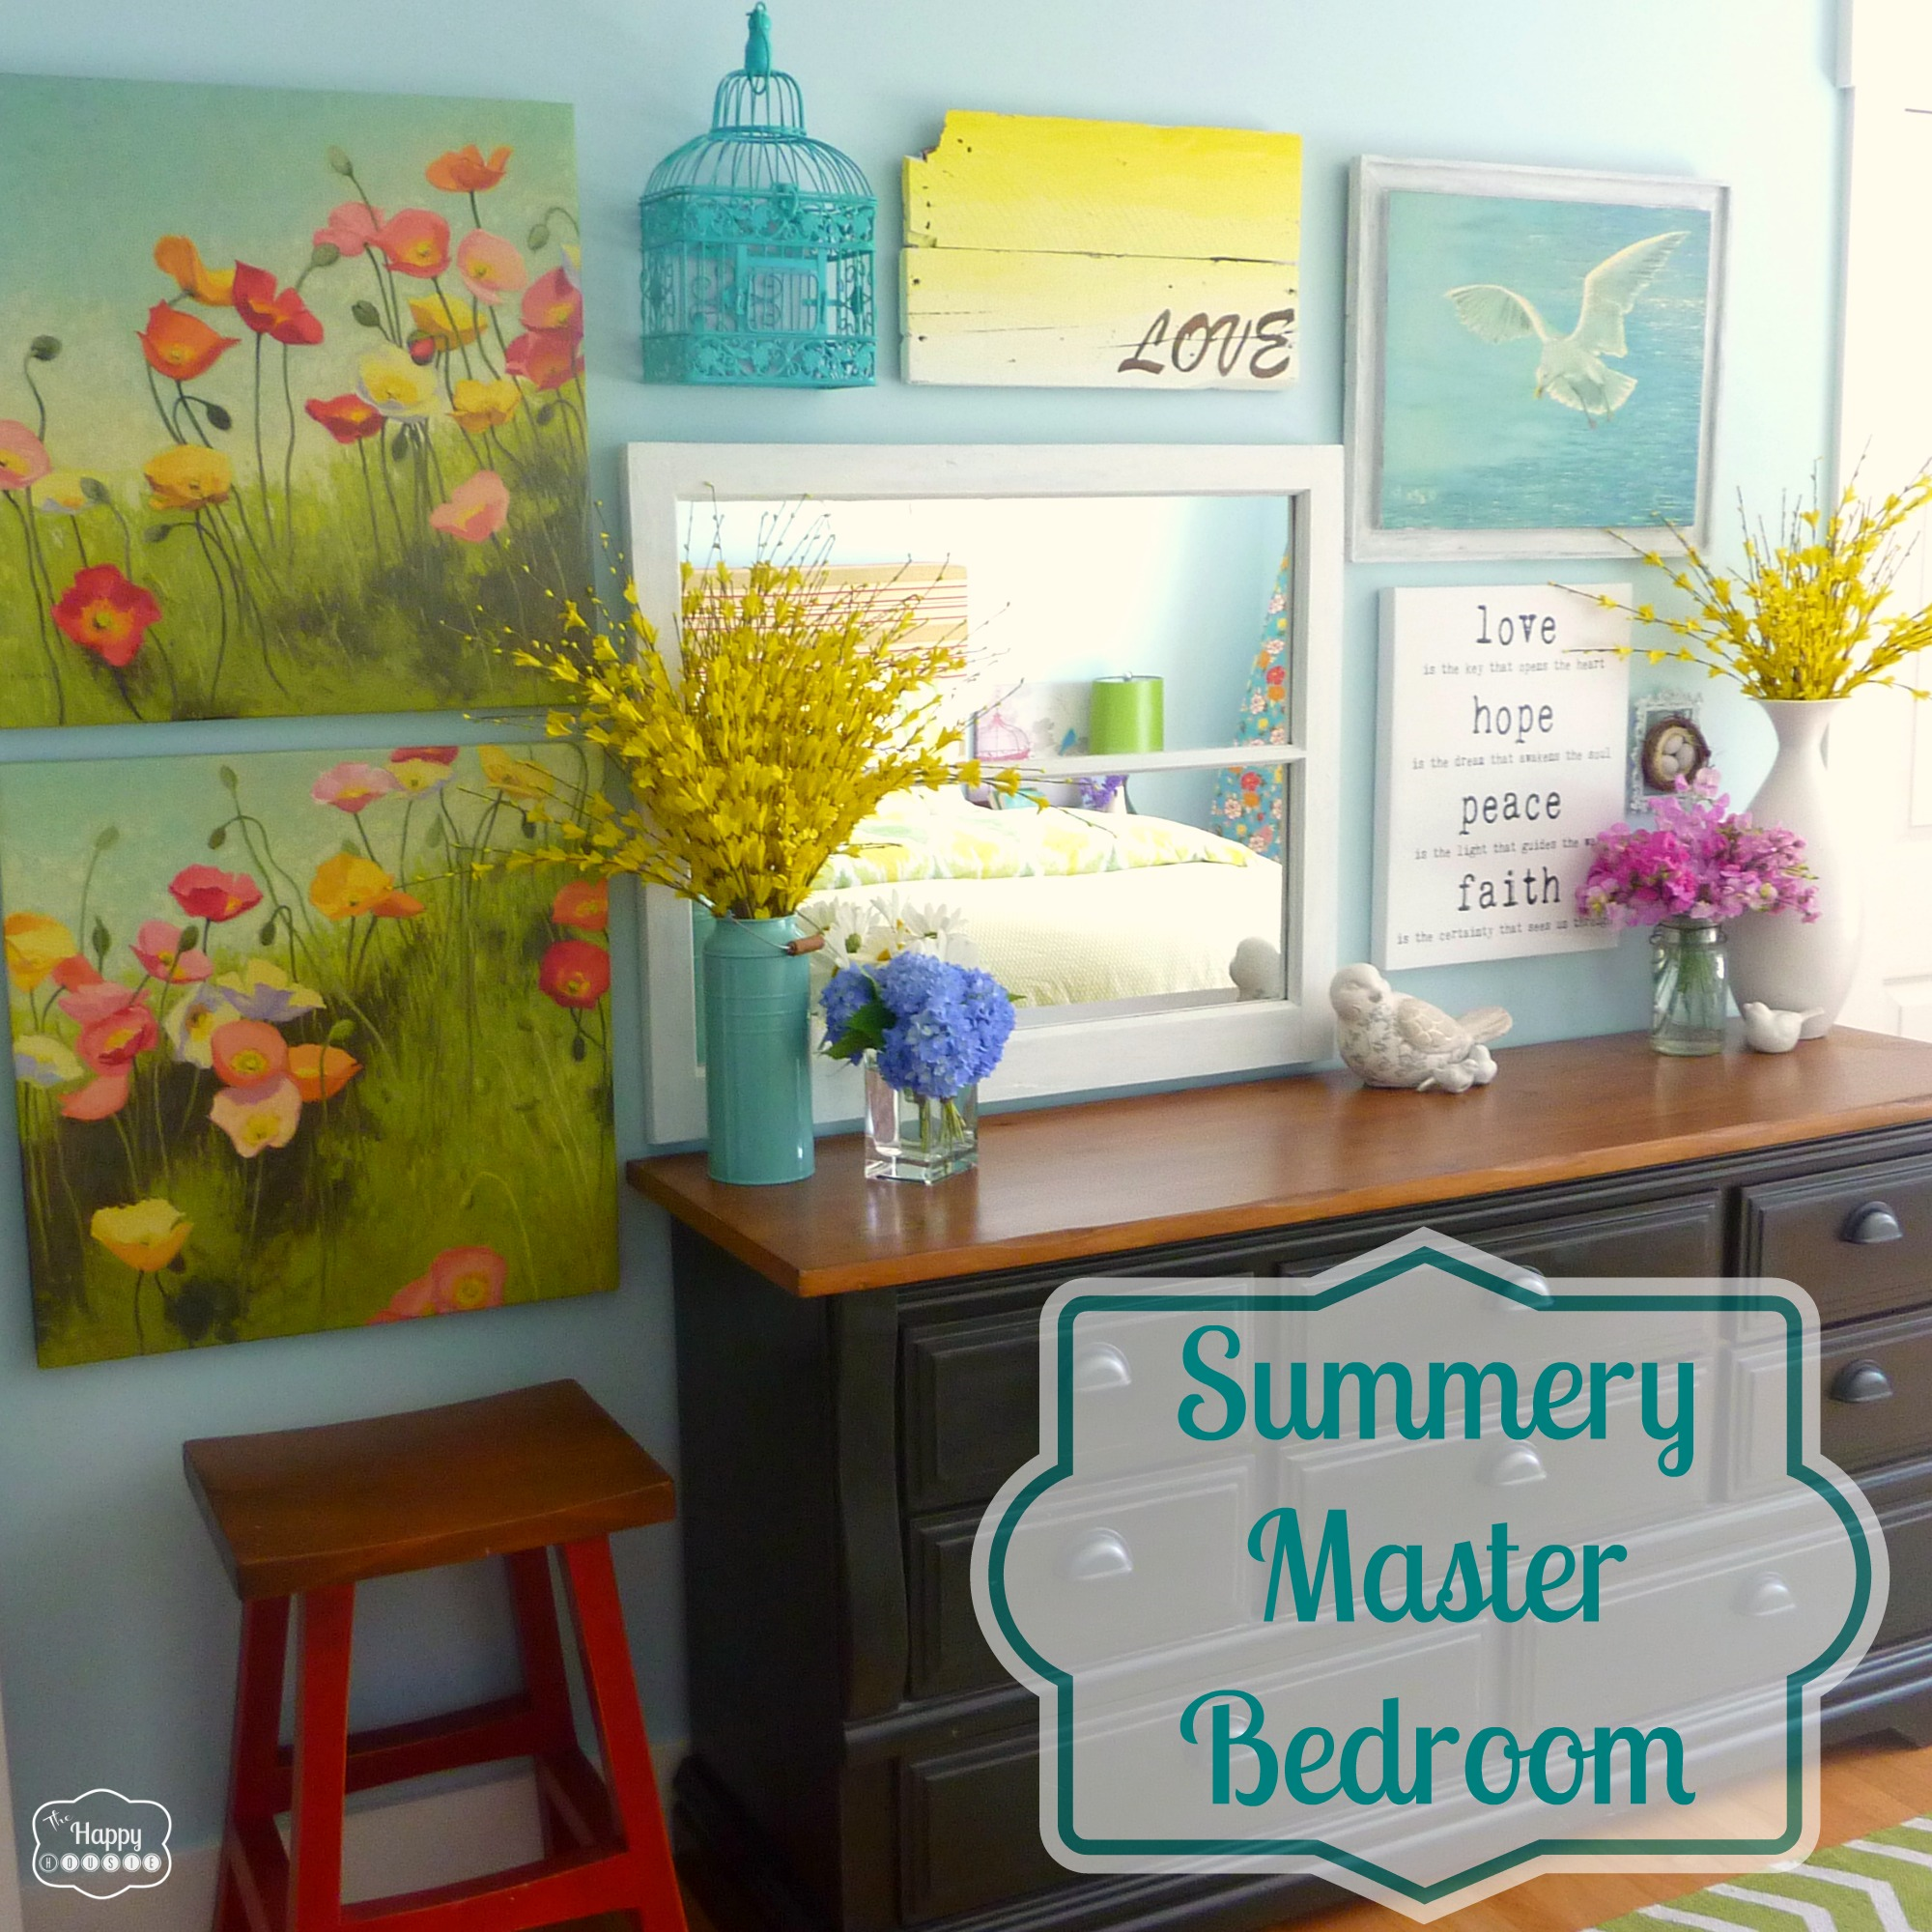 Summer Master Bedroom: A New Gallery Wall and Mixing Pattern on the Bed